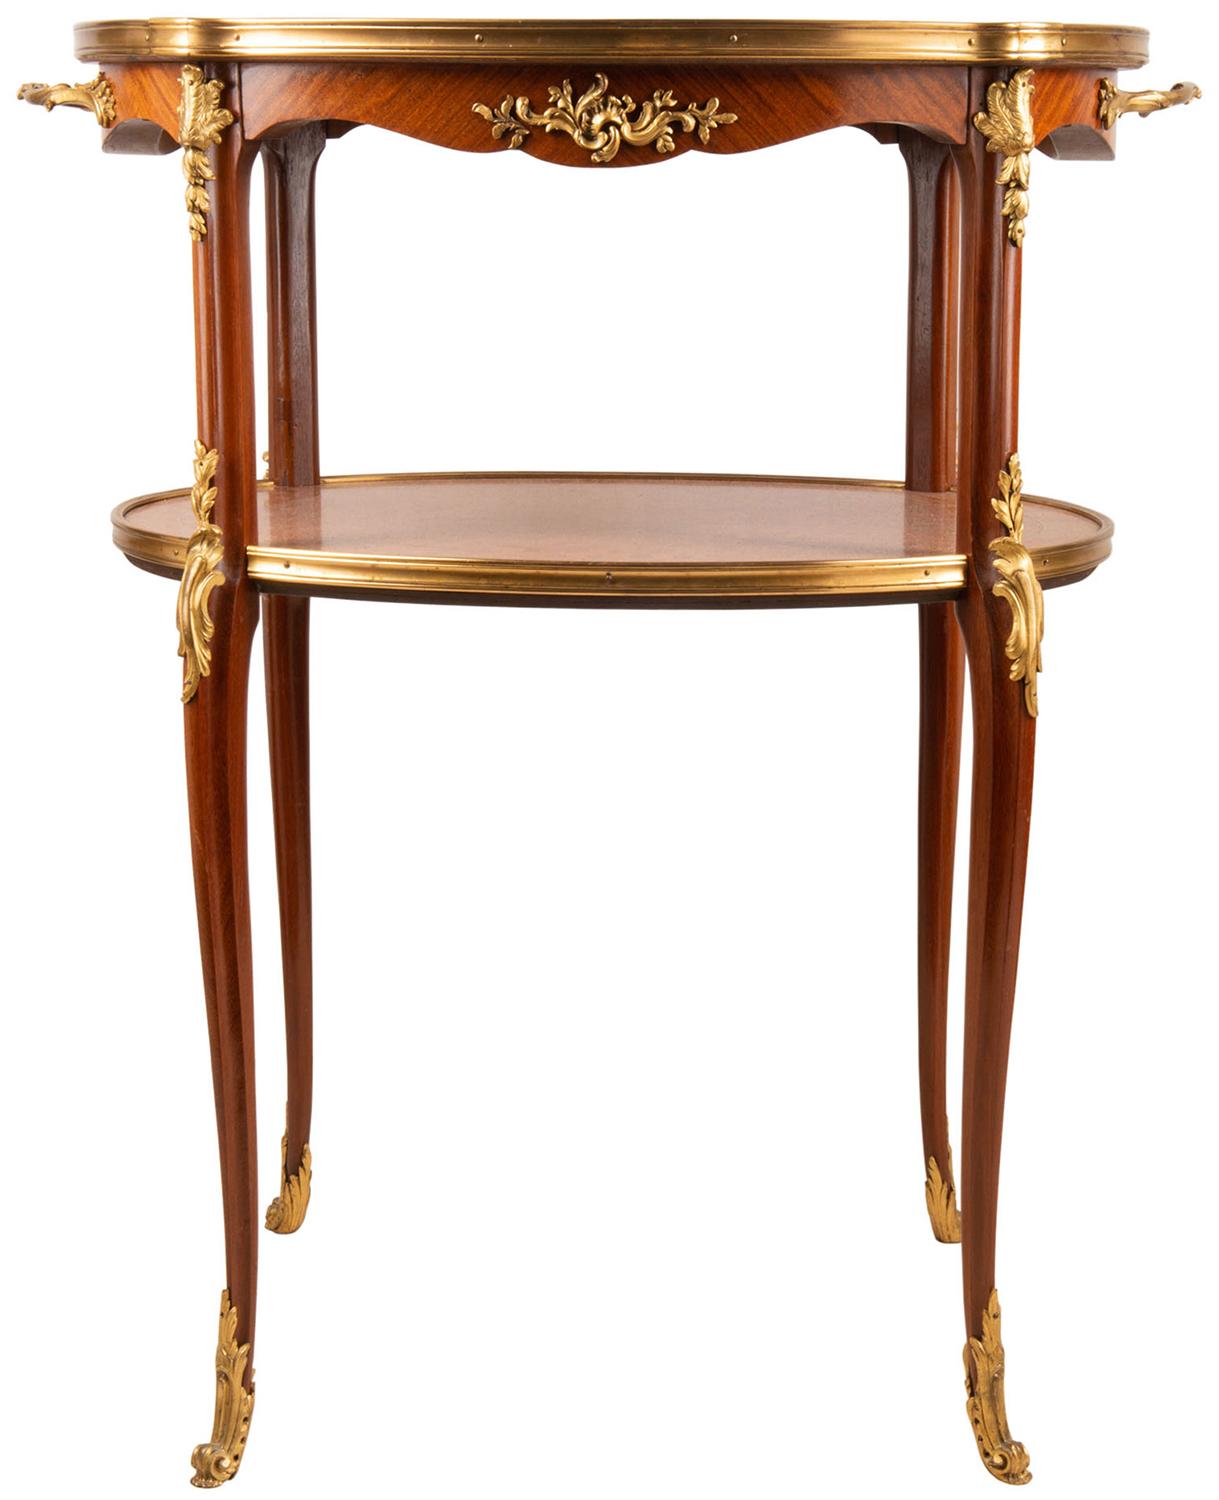 A fine quality late 19th century French two-tier étagère, having parquetry inlaid decoration, scrolling foliate gilded ormolu mounts, raised on elegant cabriole legs.
In the manner of Francoise Linke.